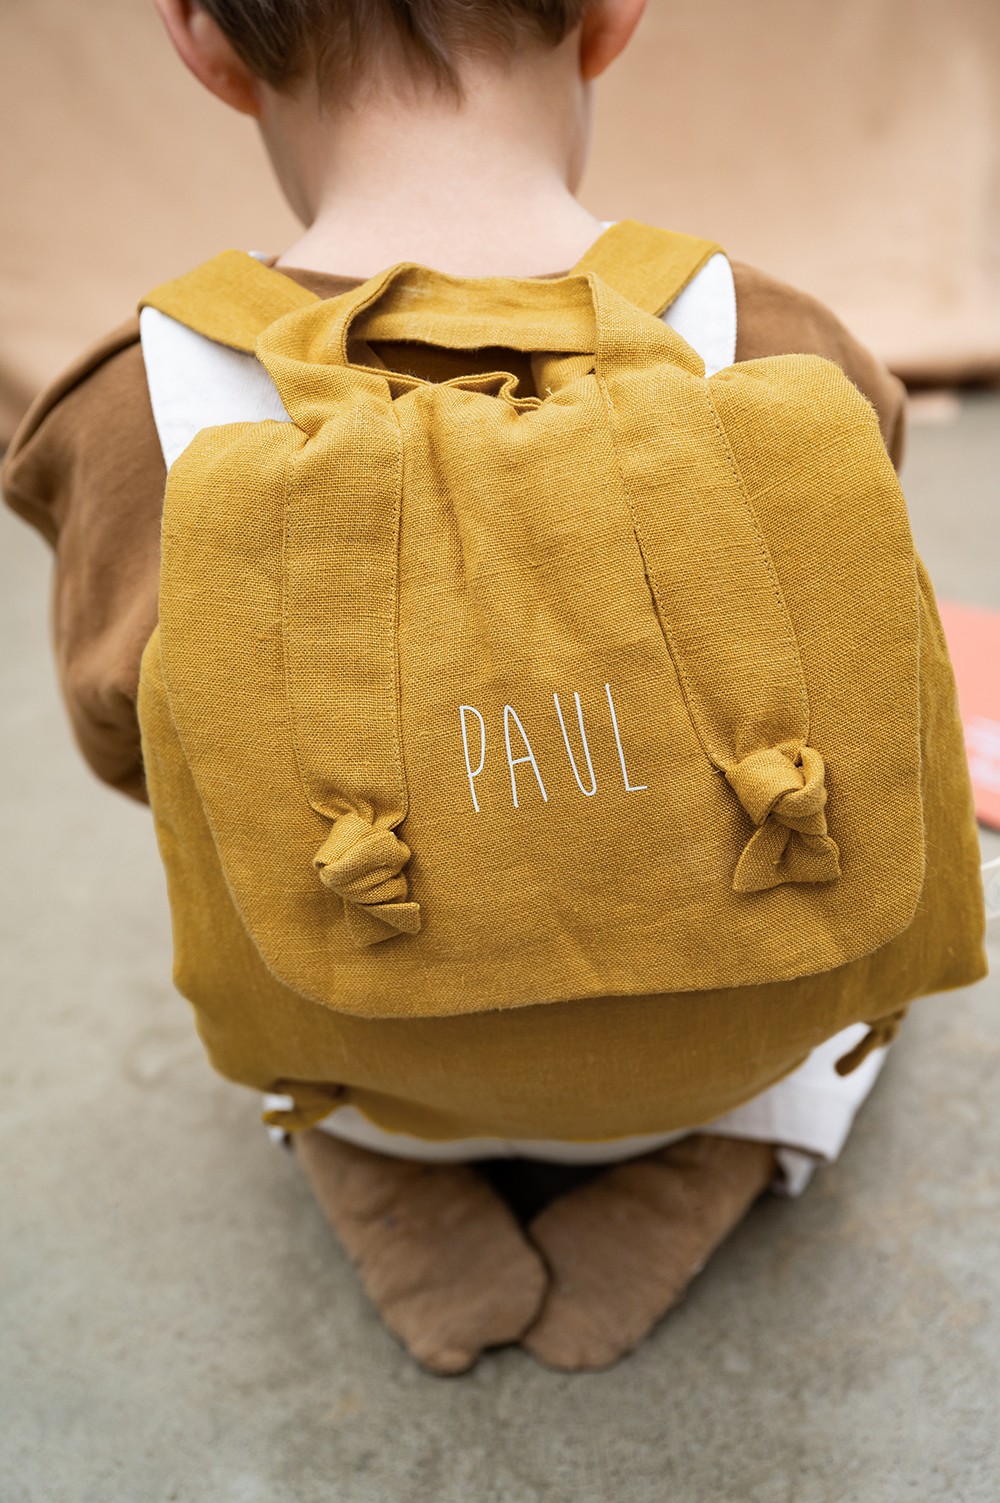 Personalised linen backpack